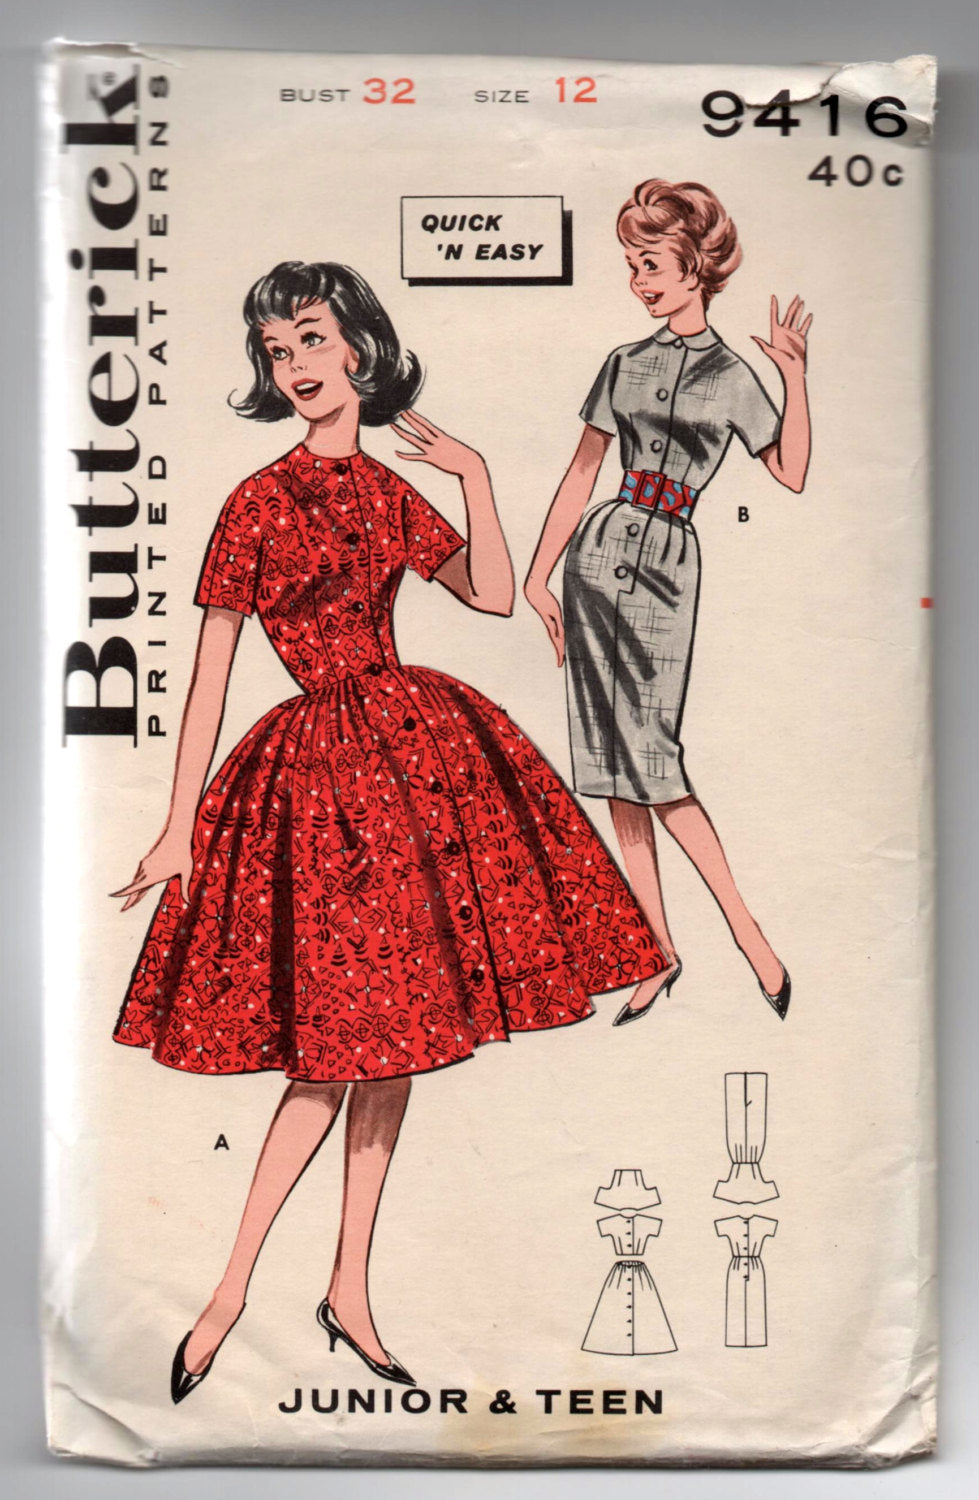 1960's Butterick One-Piece Dress with Full or Slim Skirt Pattern - Bust 32